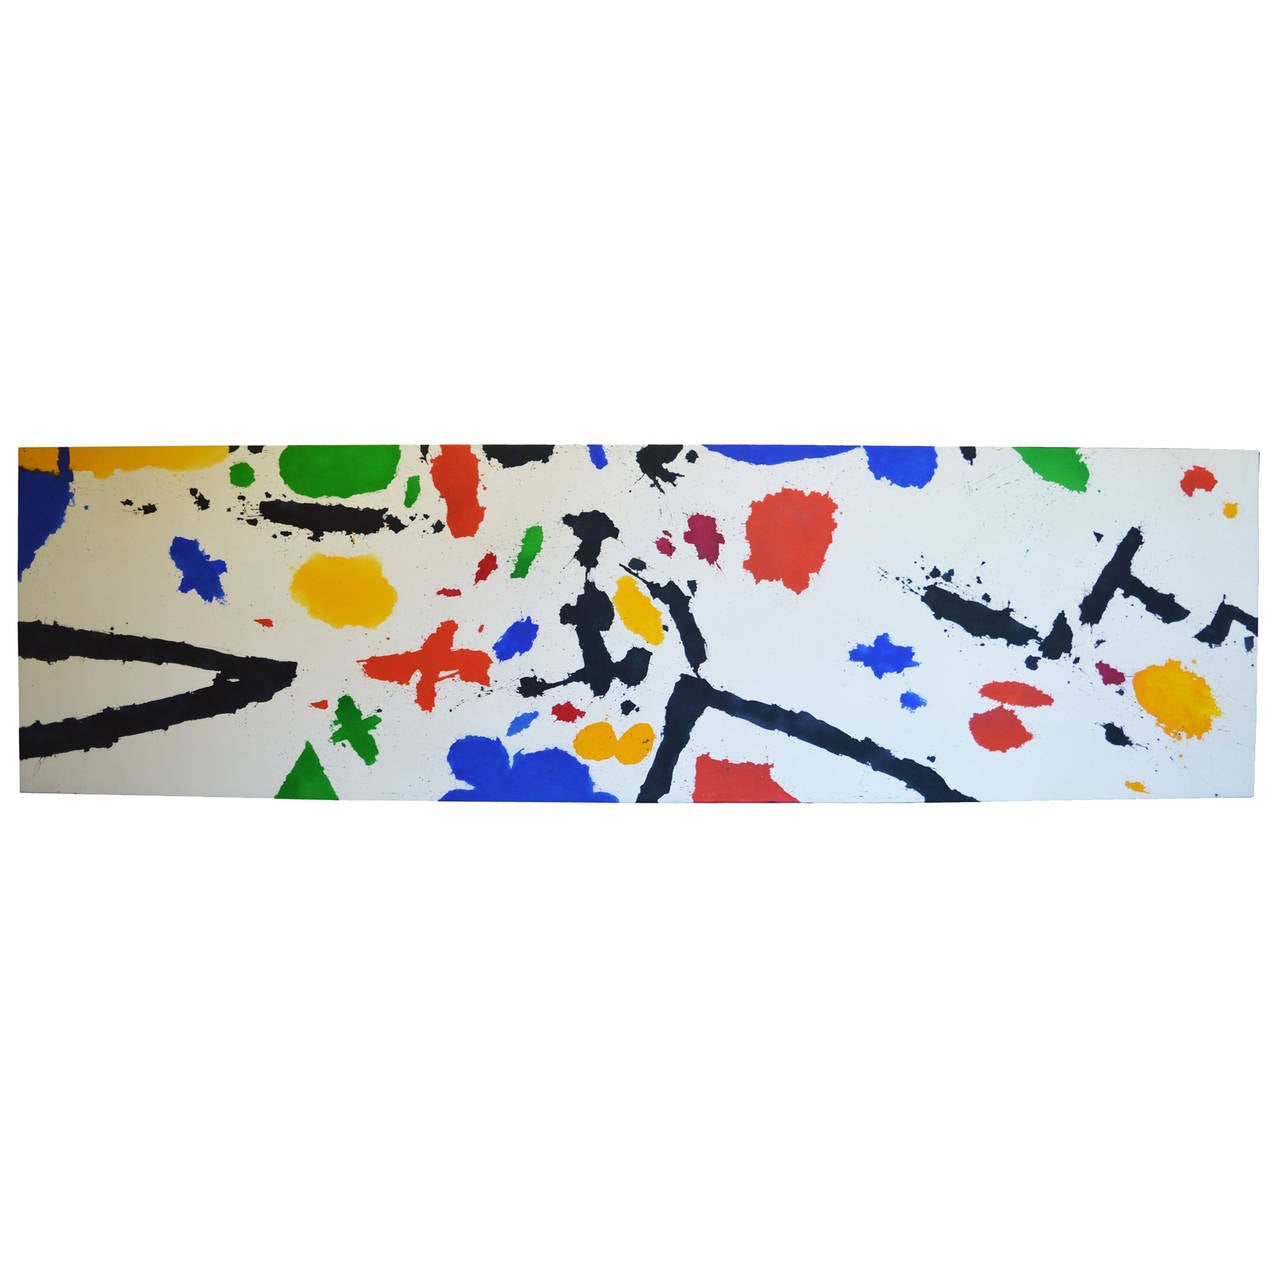 This huge painting by California artist Gerald Campbell in 1983 features paint splotches. The splotches and scale of the work recall artist Sam Francis, whose graphic paintings showcase the same appreciation for color and chaos. Campbell, a family